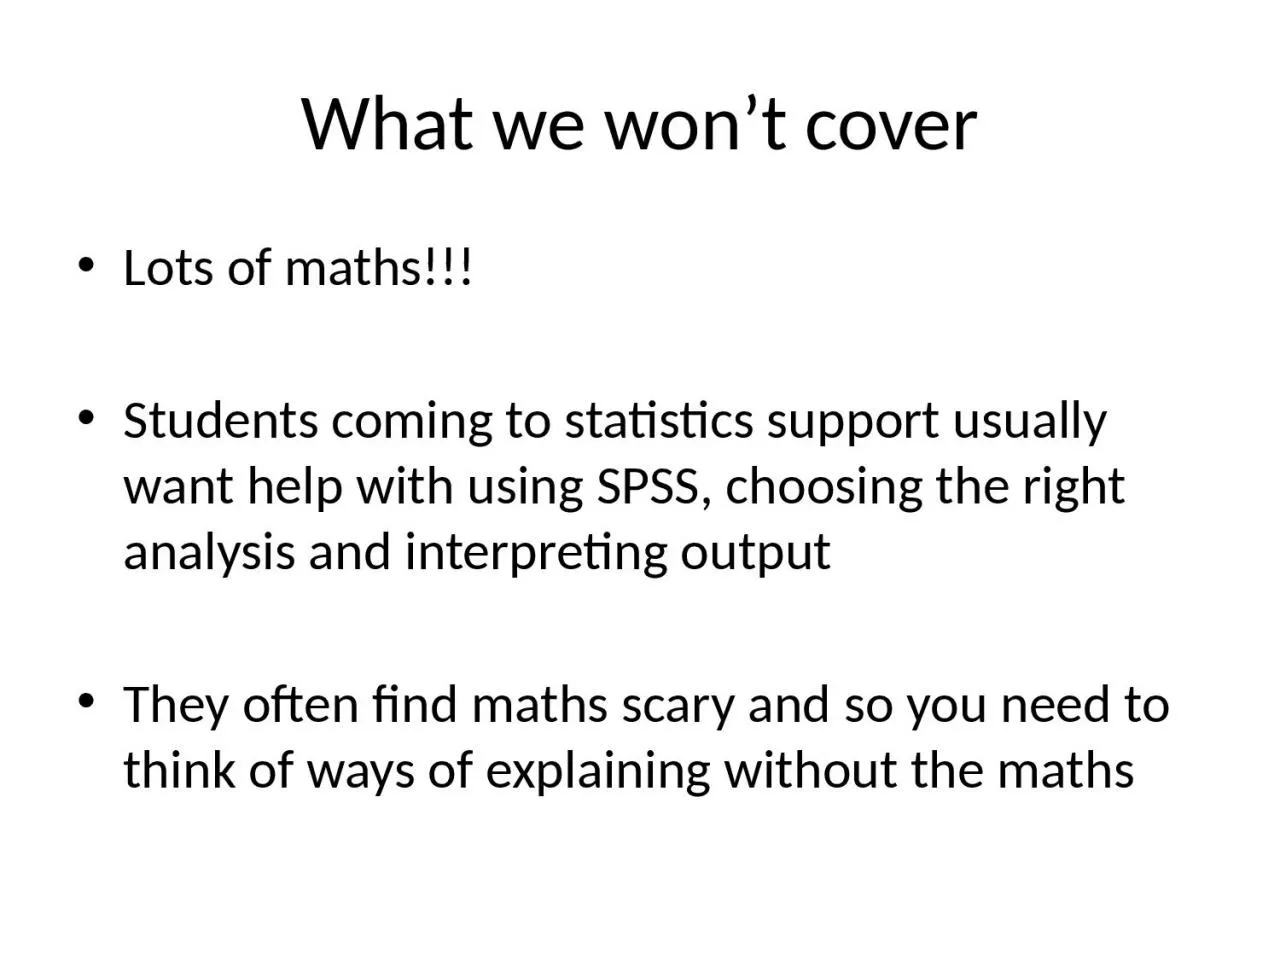 Lots of maths!!! Students coming to statistics support usually want help with using SPSS,